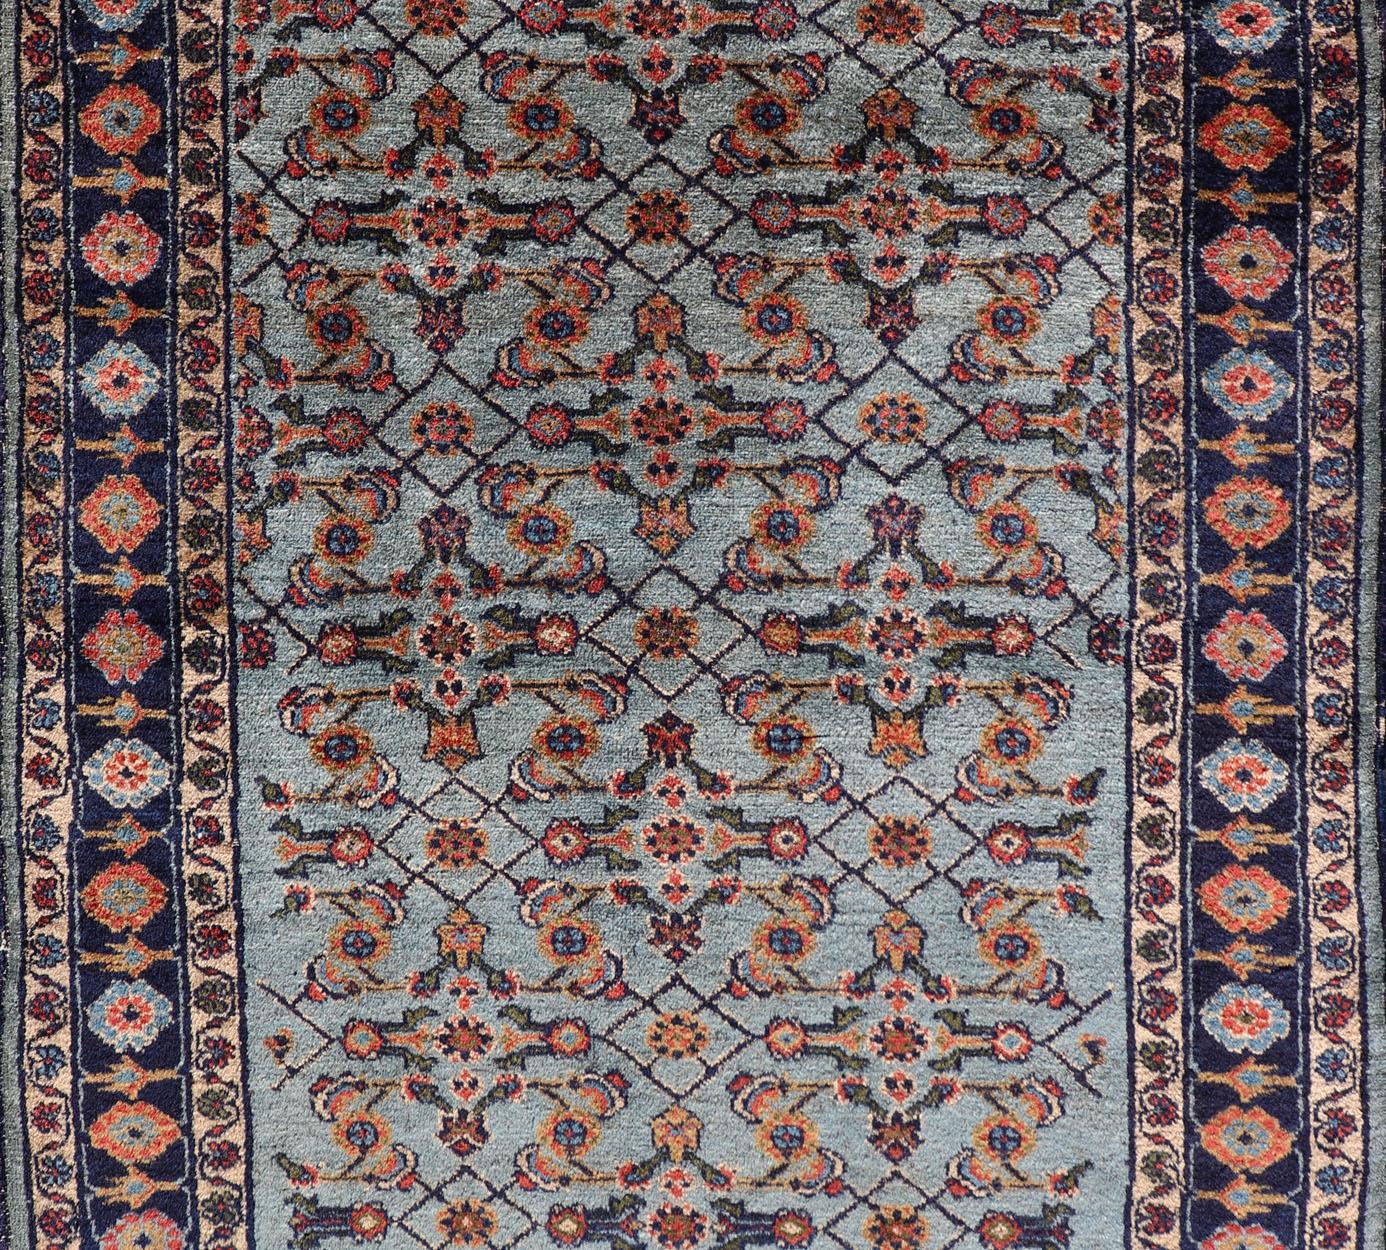 Intricately designed antique Malayer small rug in light navy and light blue. Keivan Woven Arts /  rug R20-0827, country of origin / type: Iran / Malayer, circa 1920.

This beautiful antique Malayer from Persia features an elaborate all-over design,